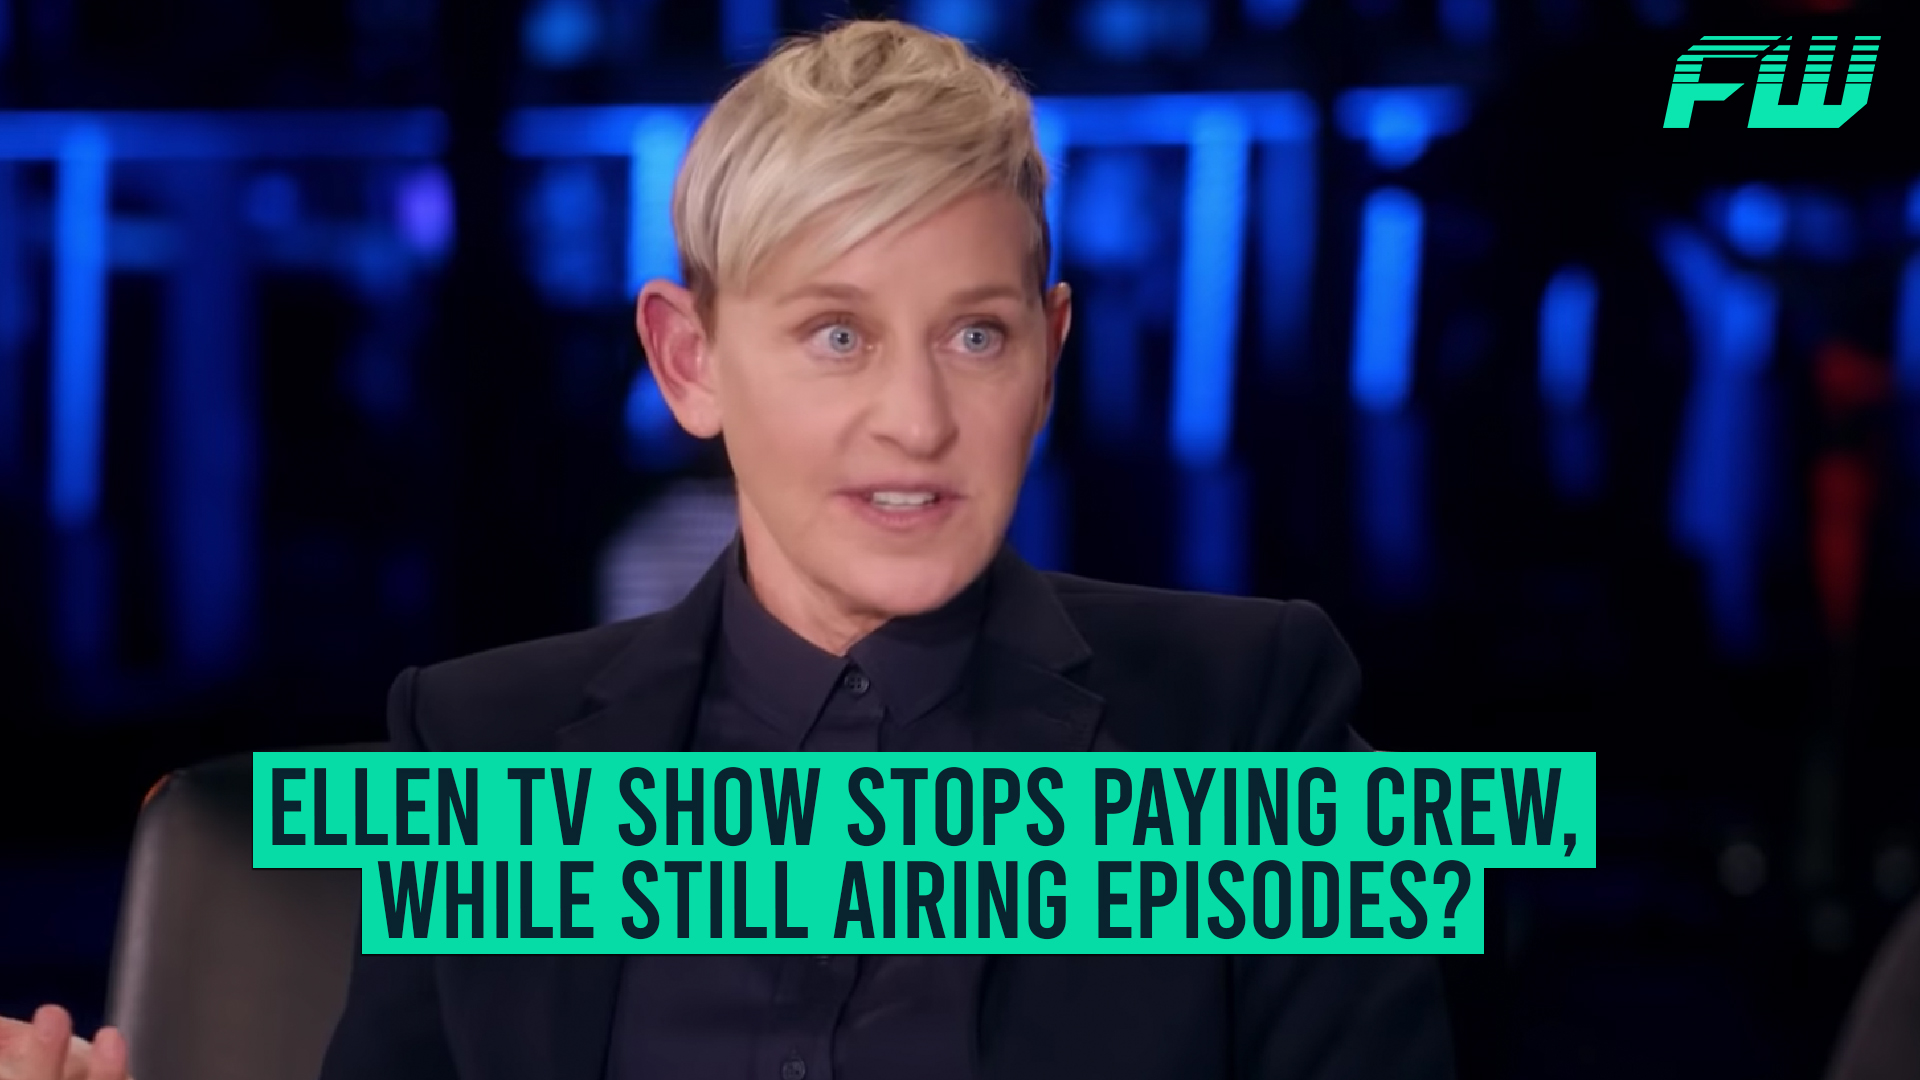 Ellen TV Show Stops Paying Crew While Still Airing Episodes